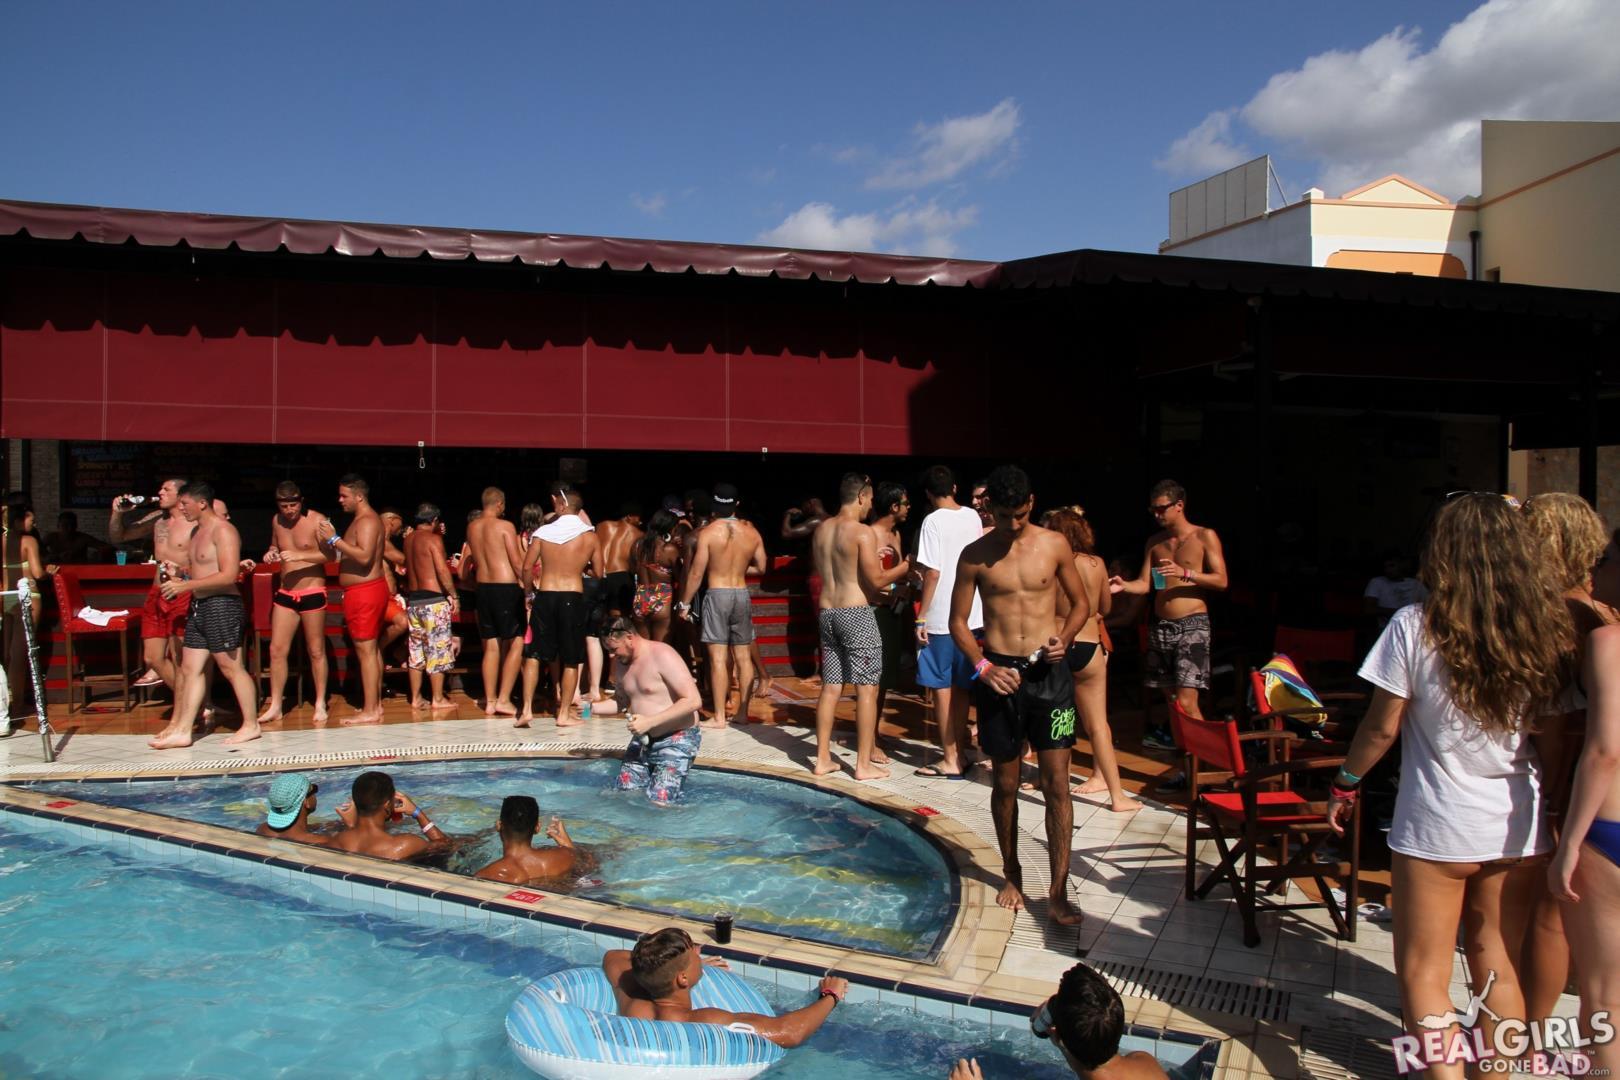 Wild college students get naked at a pool party #60775879